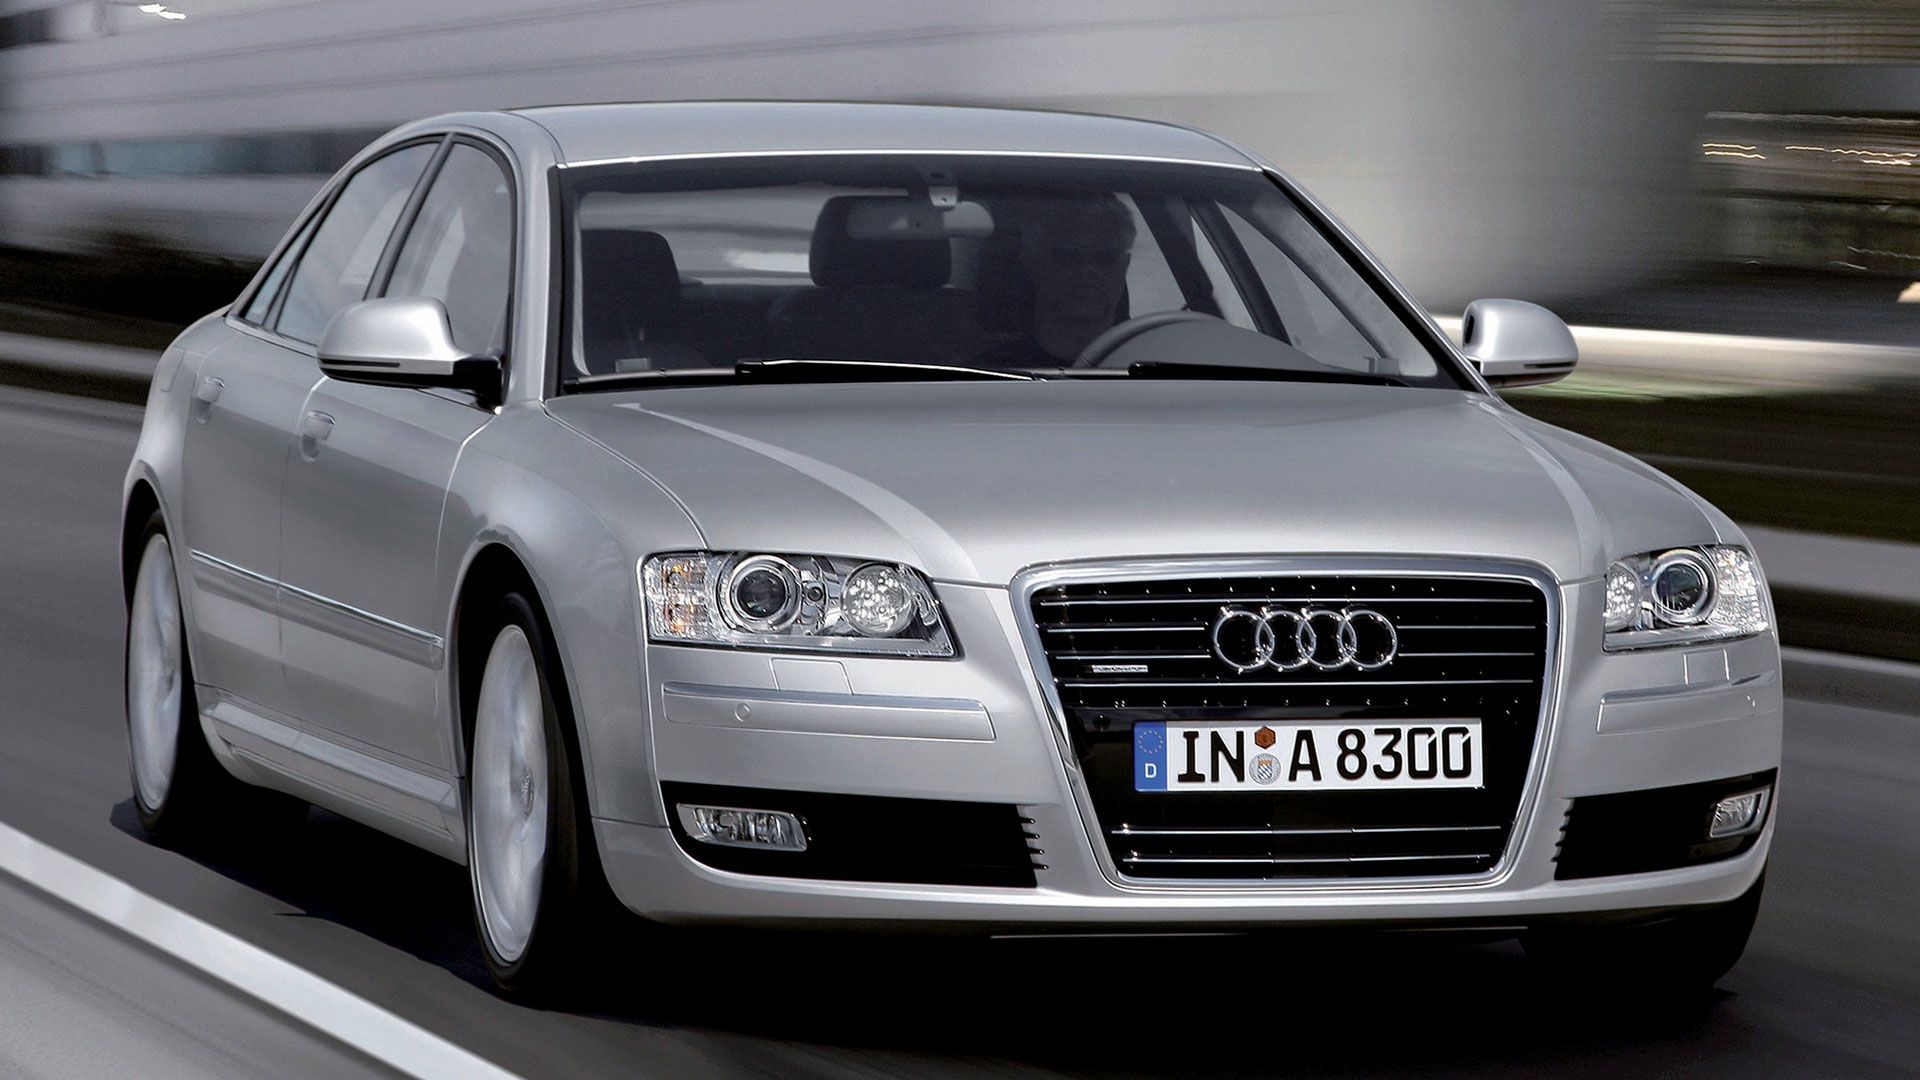 Silver Audi A8 drives onto the road